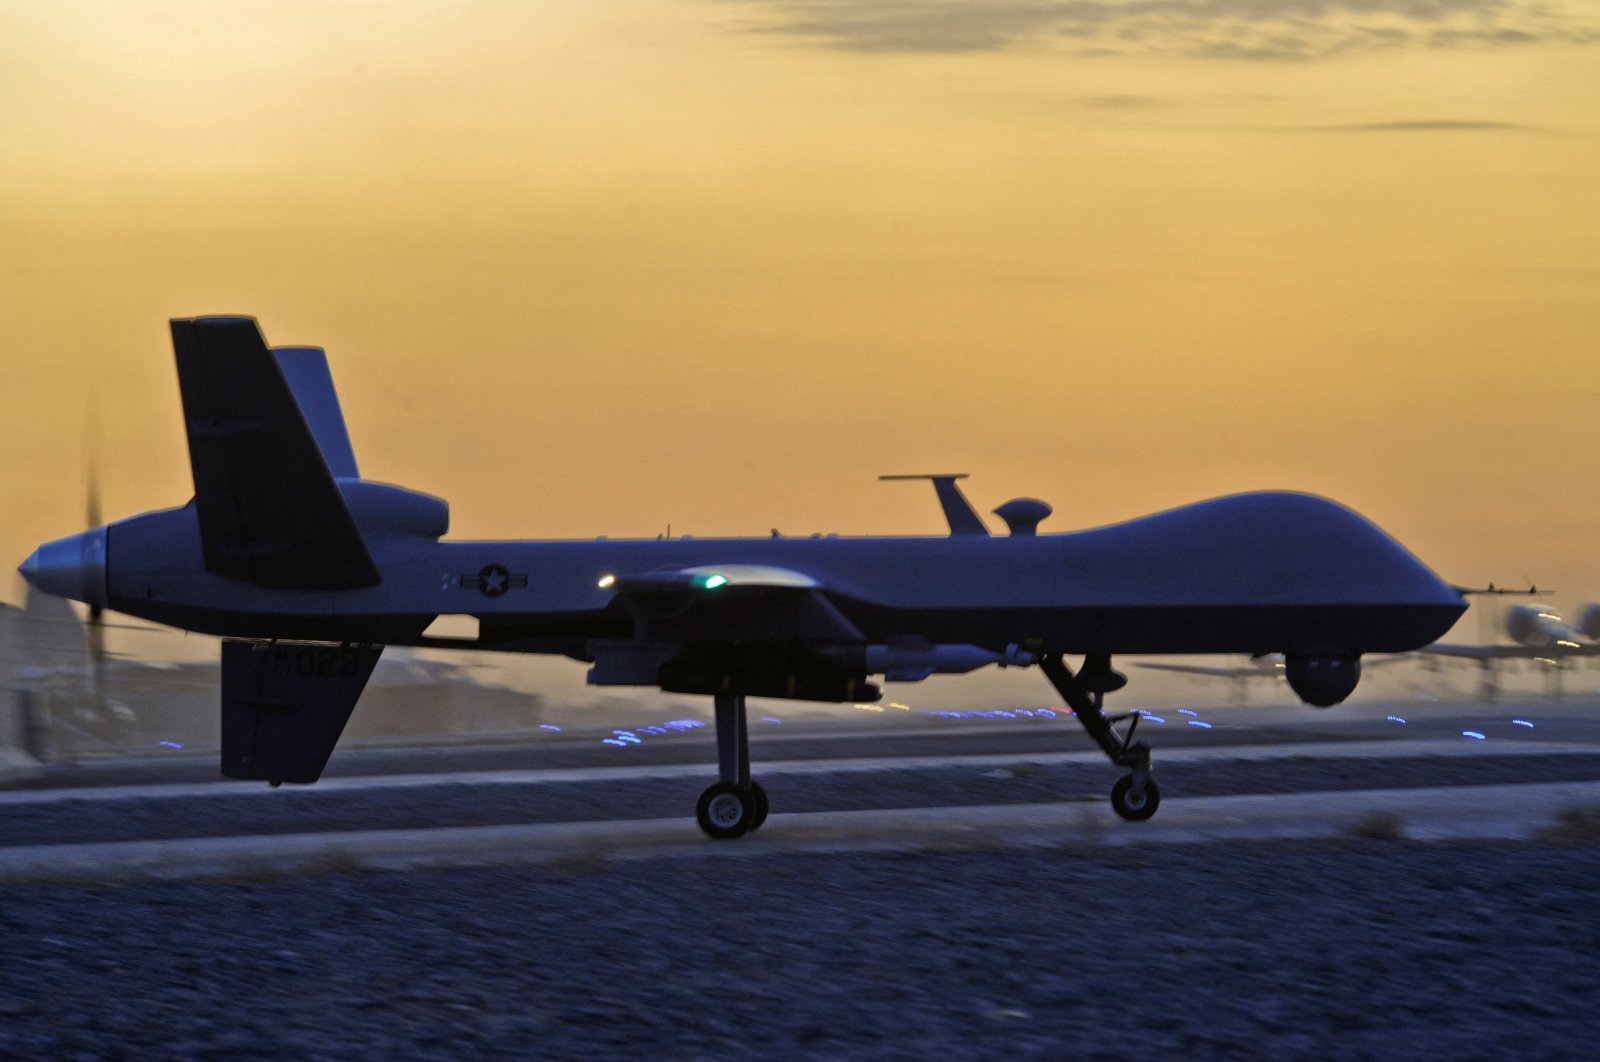 A MQ-9 Reaper drone taxis at Kandahar Airfield, Afghanistan in this Dec.27, 2009 photo. (Reuters Photo)